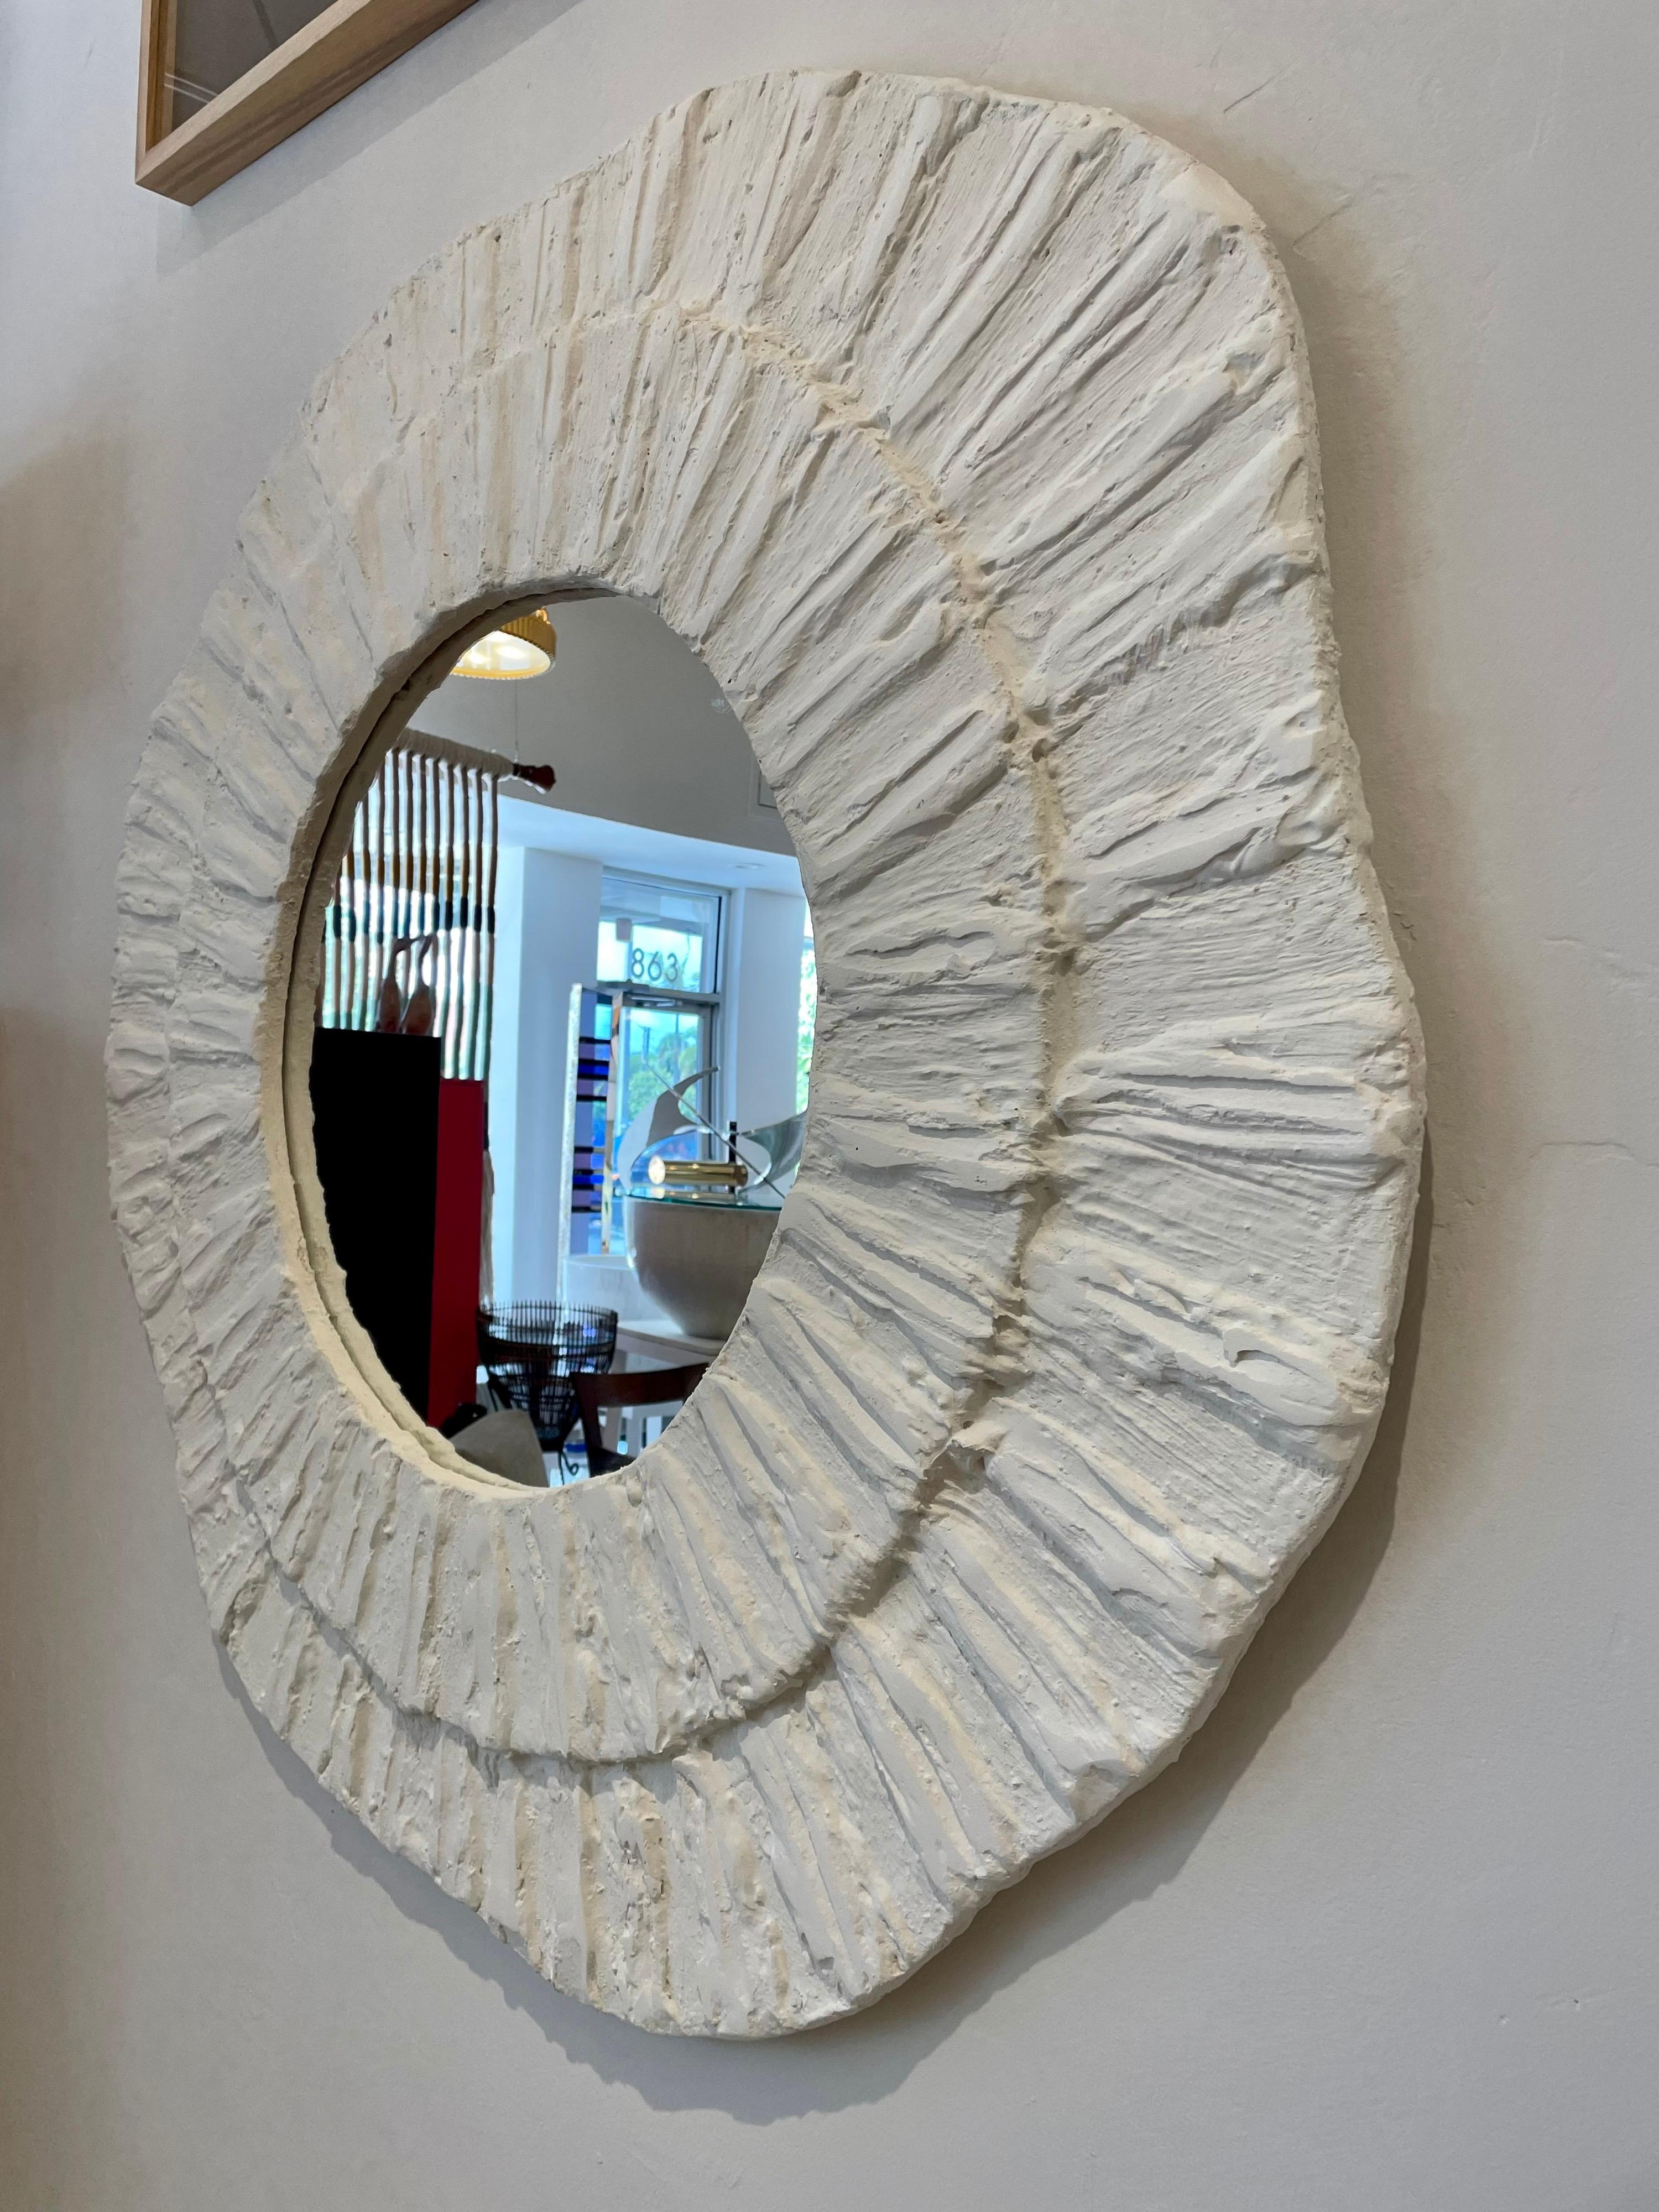 This wonderful textured French plaster mirror in a wavy designed frame in two spheres. Very organic and modern - tres chic! Measure: 4 feet diameter.

Note: we have two available but sold separately.